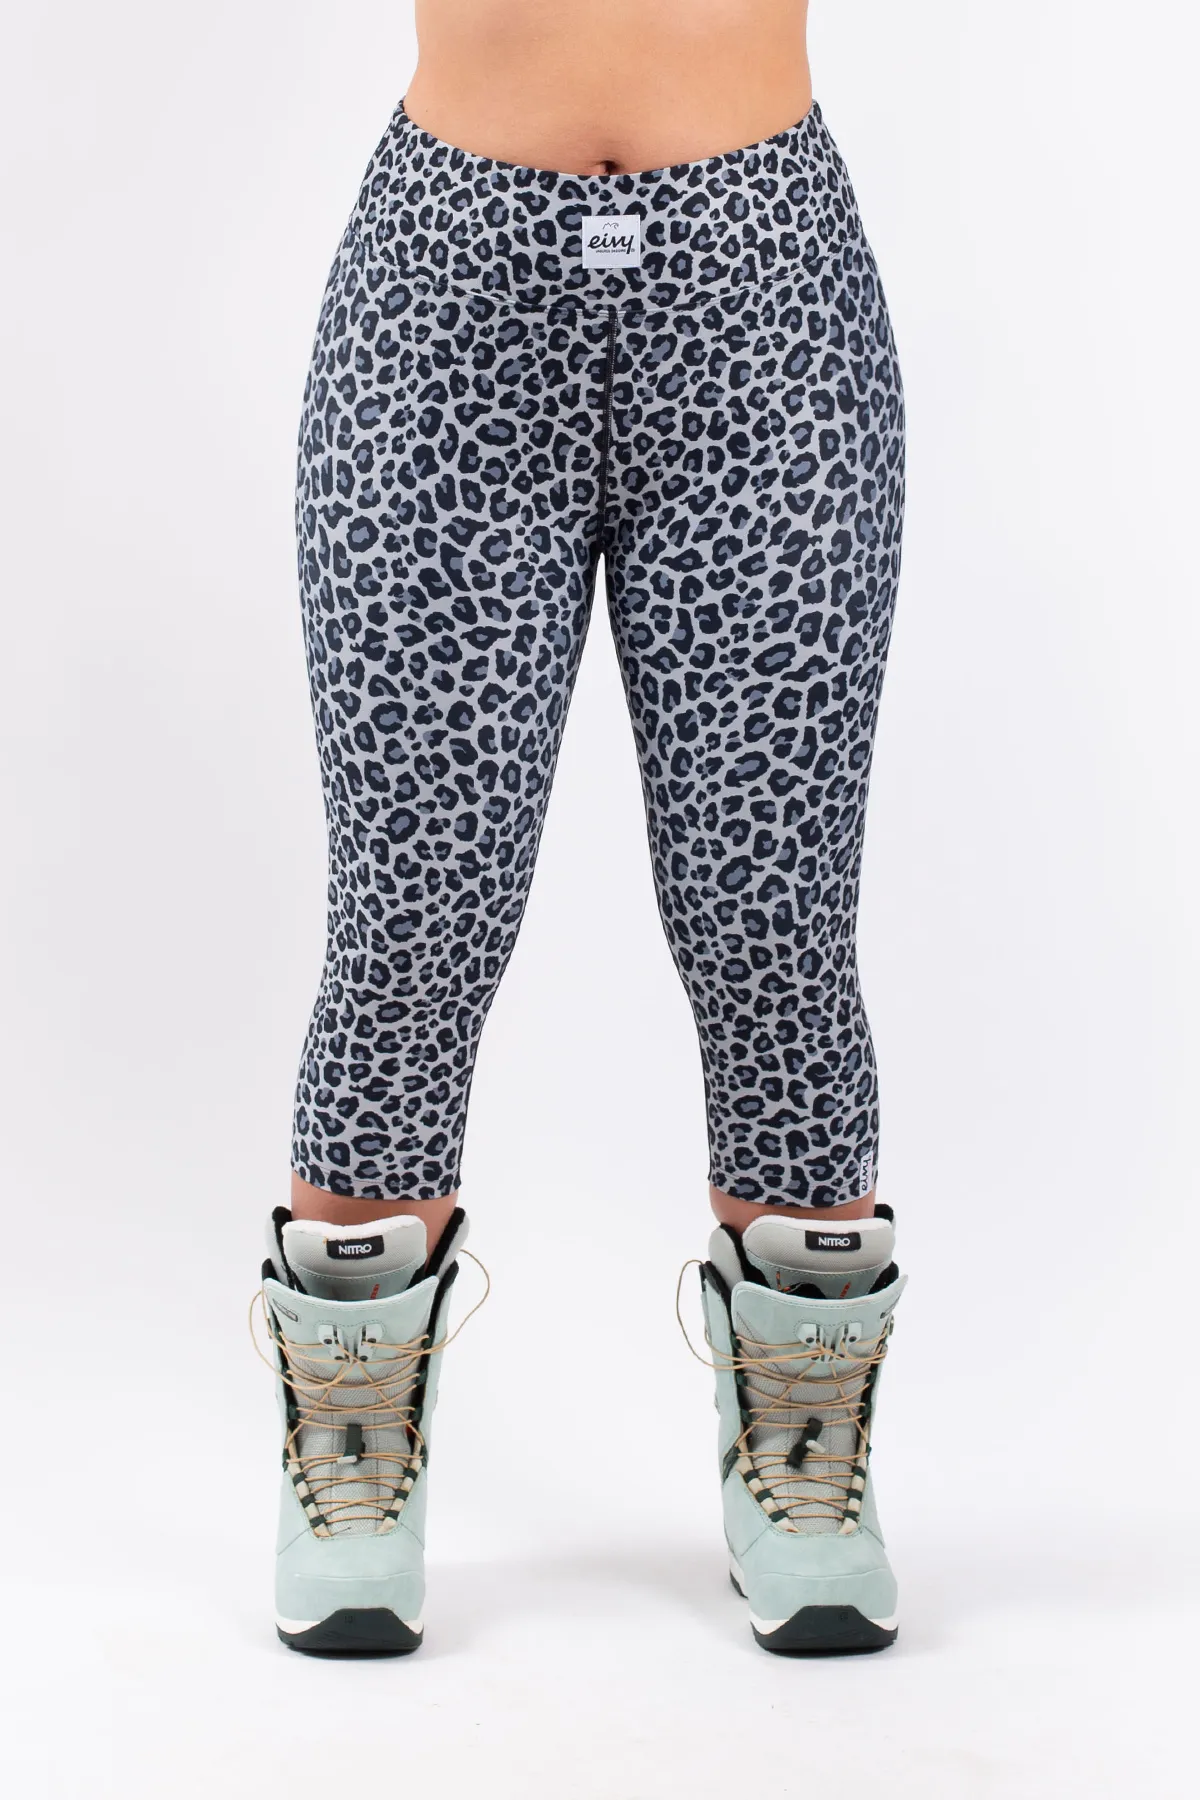 Icecold 3/4 Tights - Snow Leopard